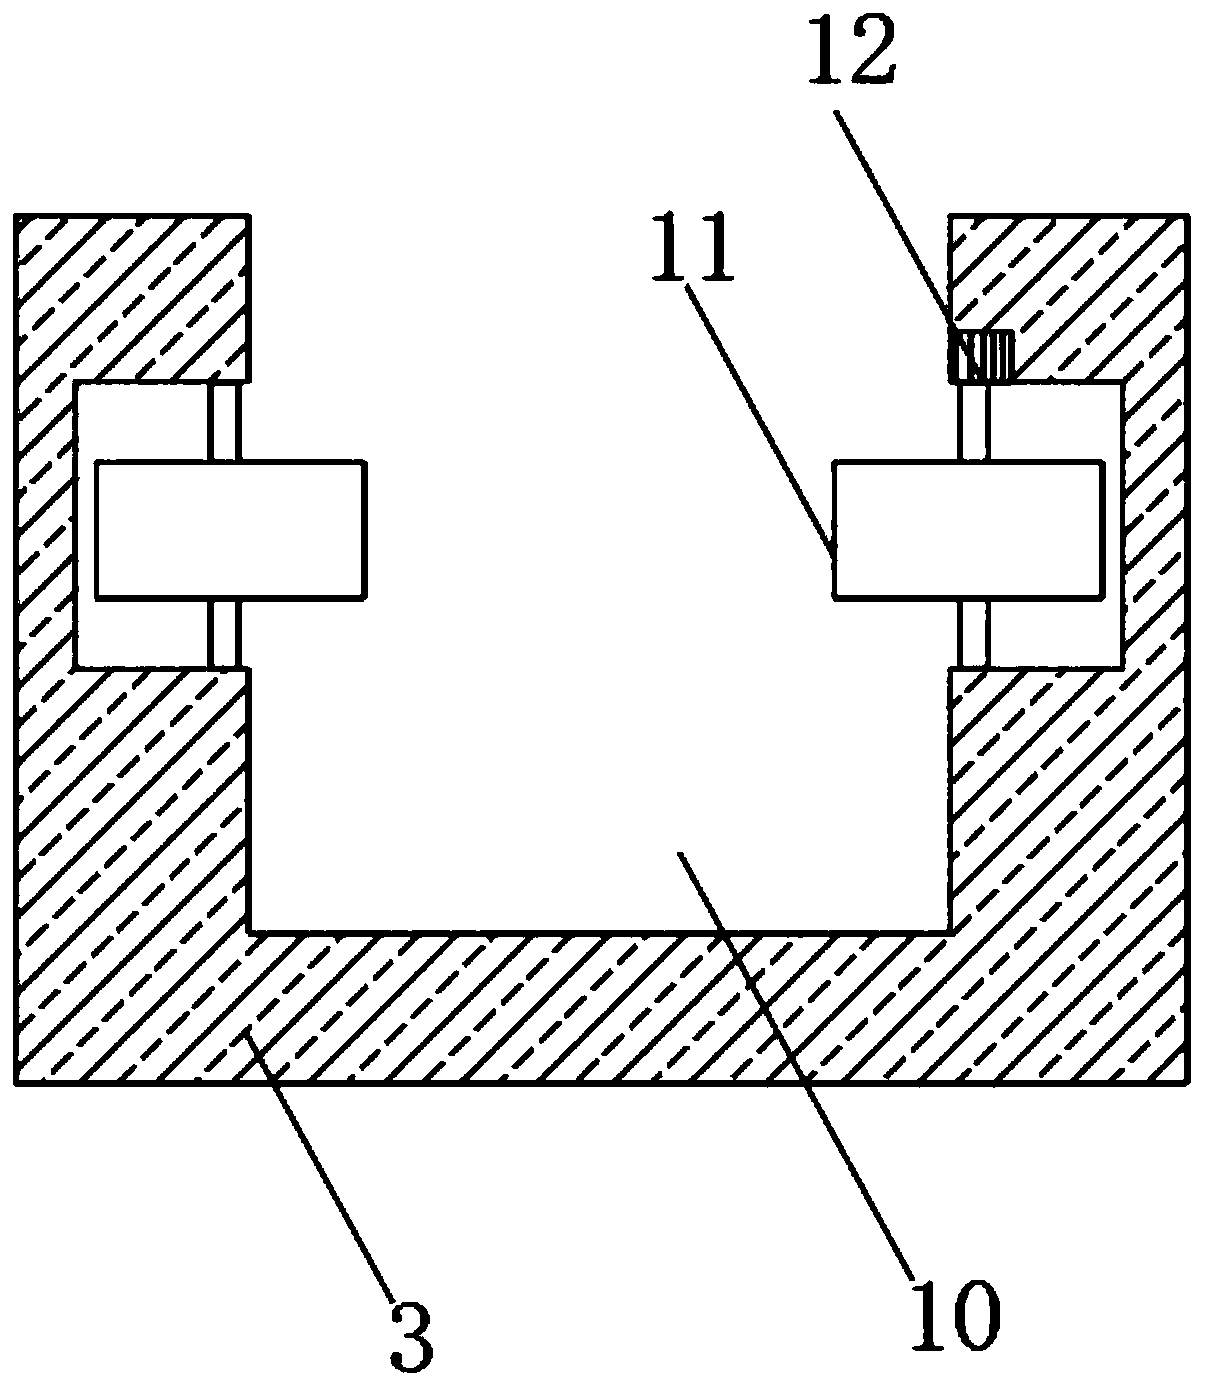 Light-emitting diode for supplementing light in greenhouse